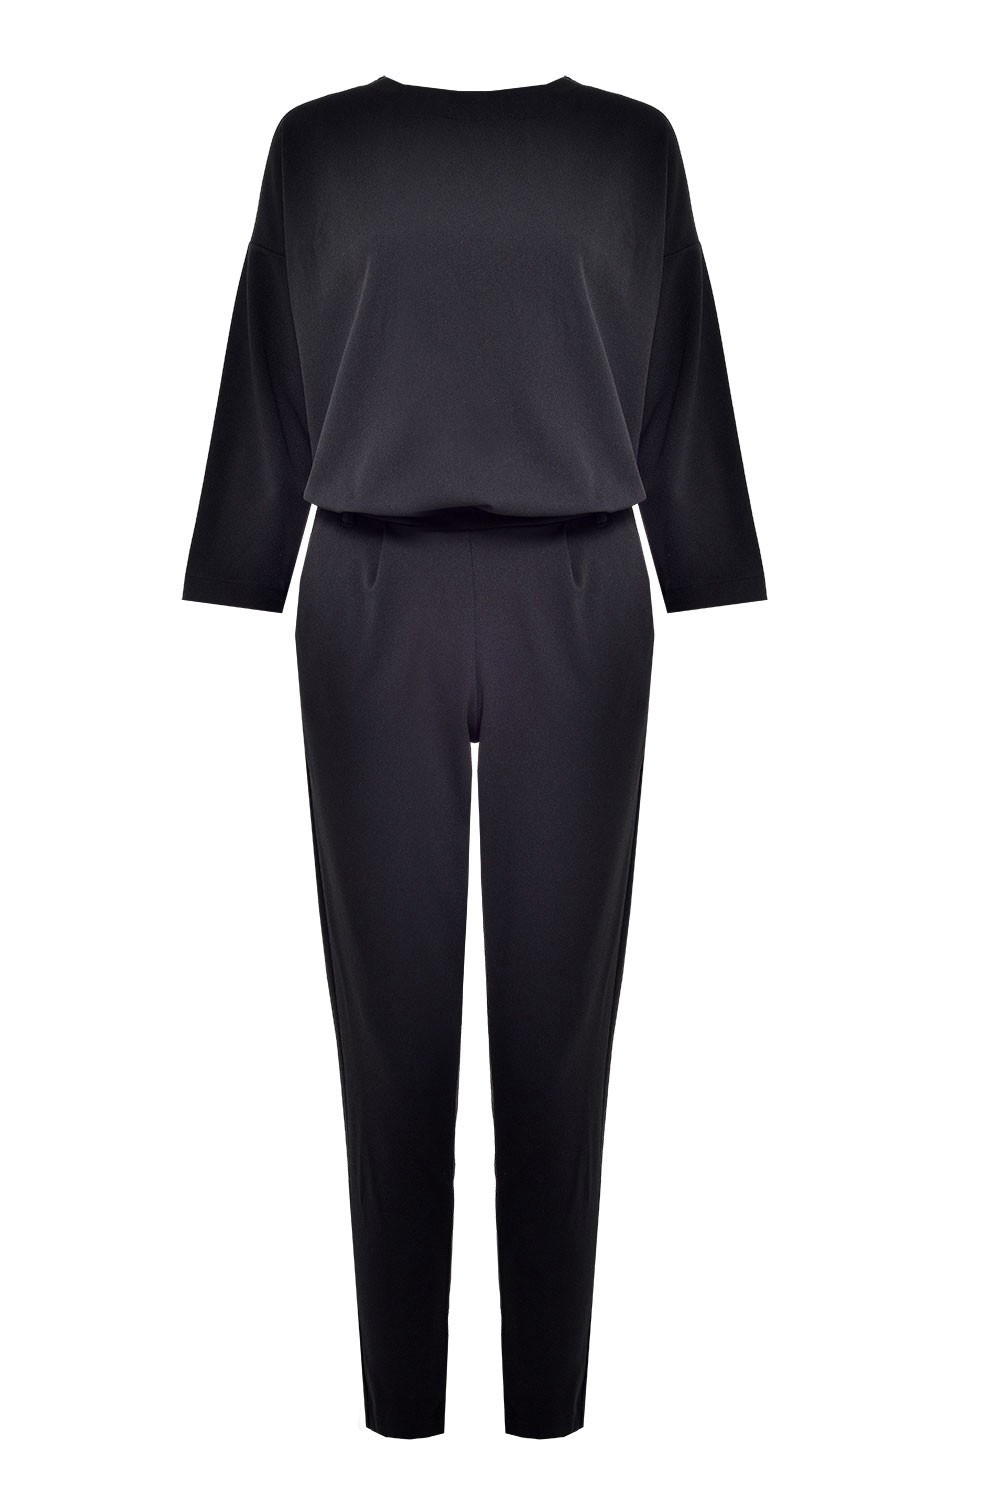 JDY Laurette Relaxed 3/4 Sleeve Jumpsuit | iCLOTHING